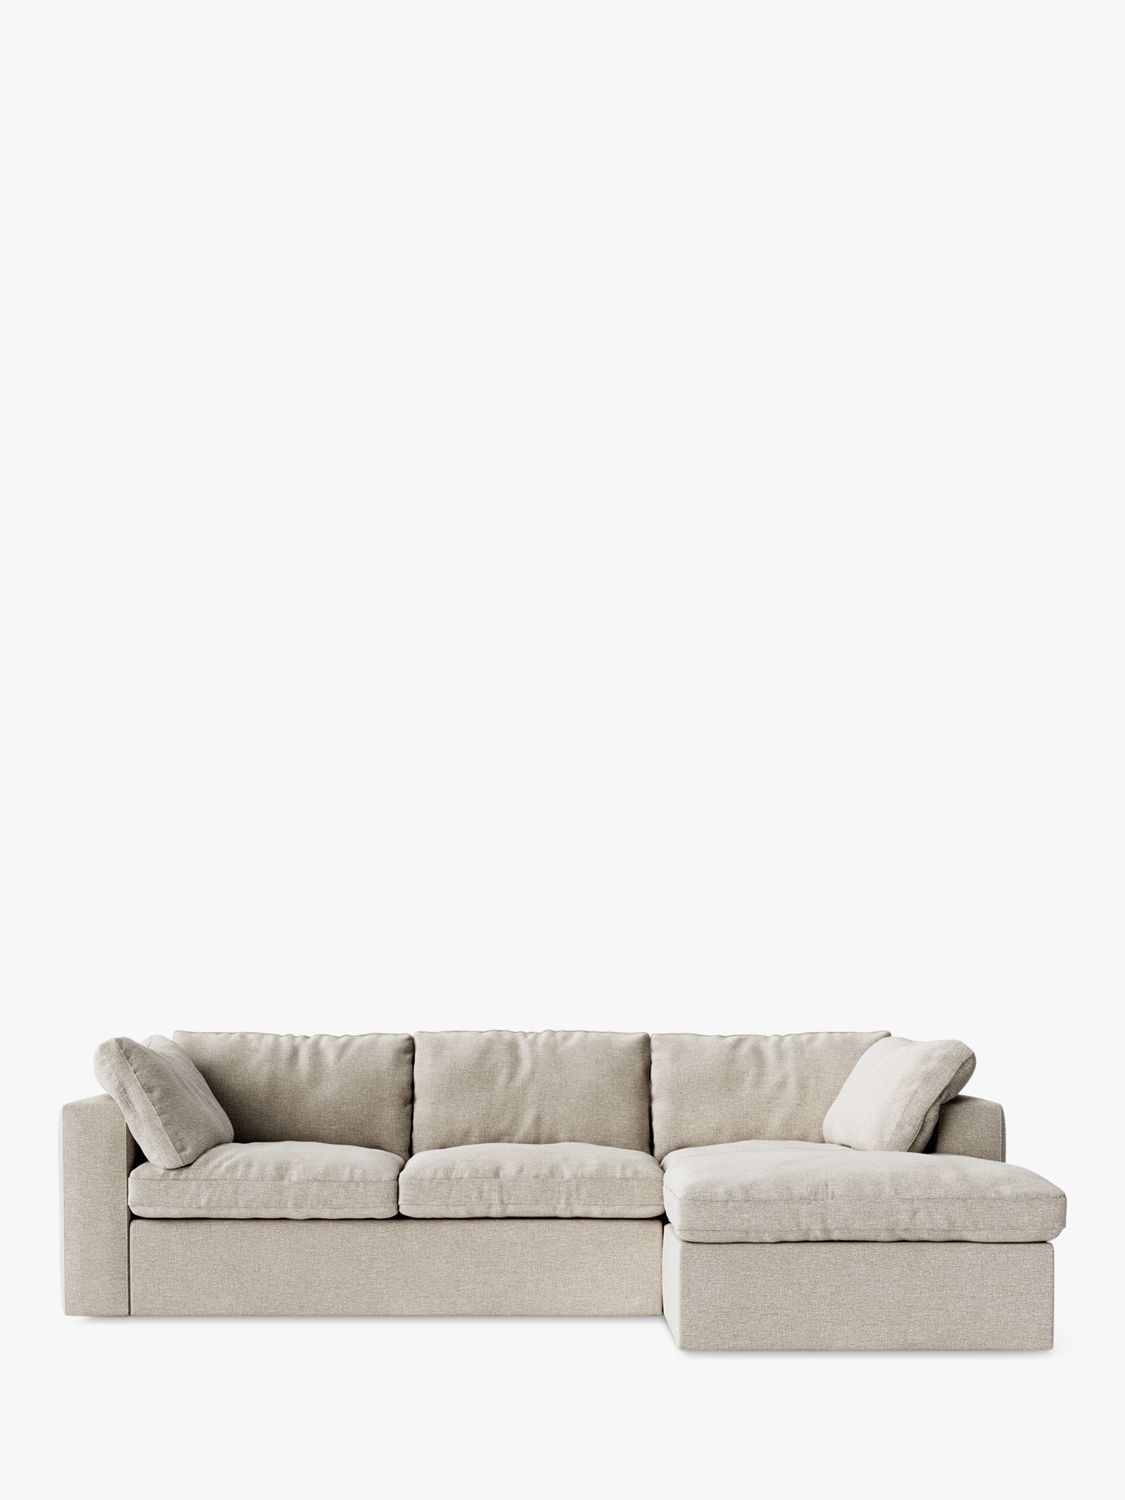 Swoon Seattle Grand 4 Seater RHF Chaise End Sofa